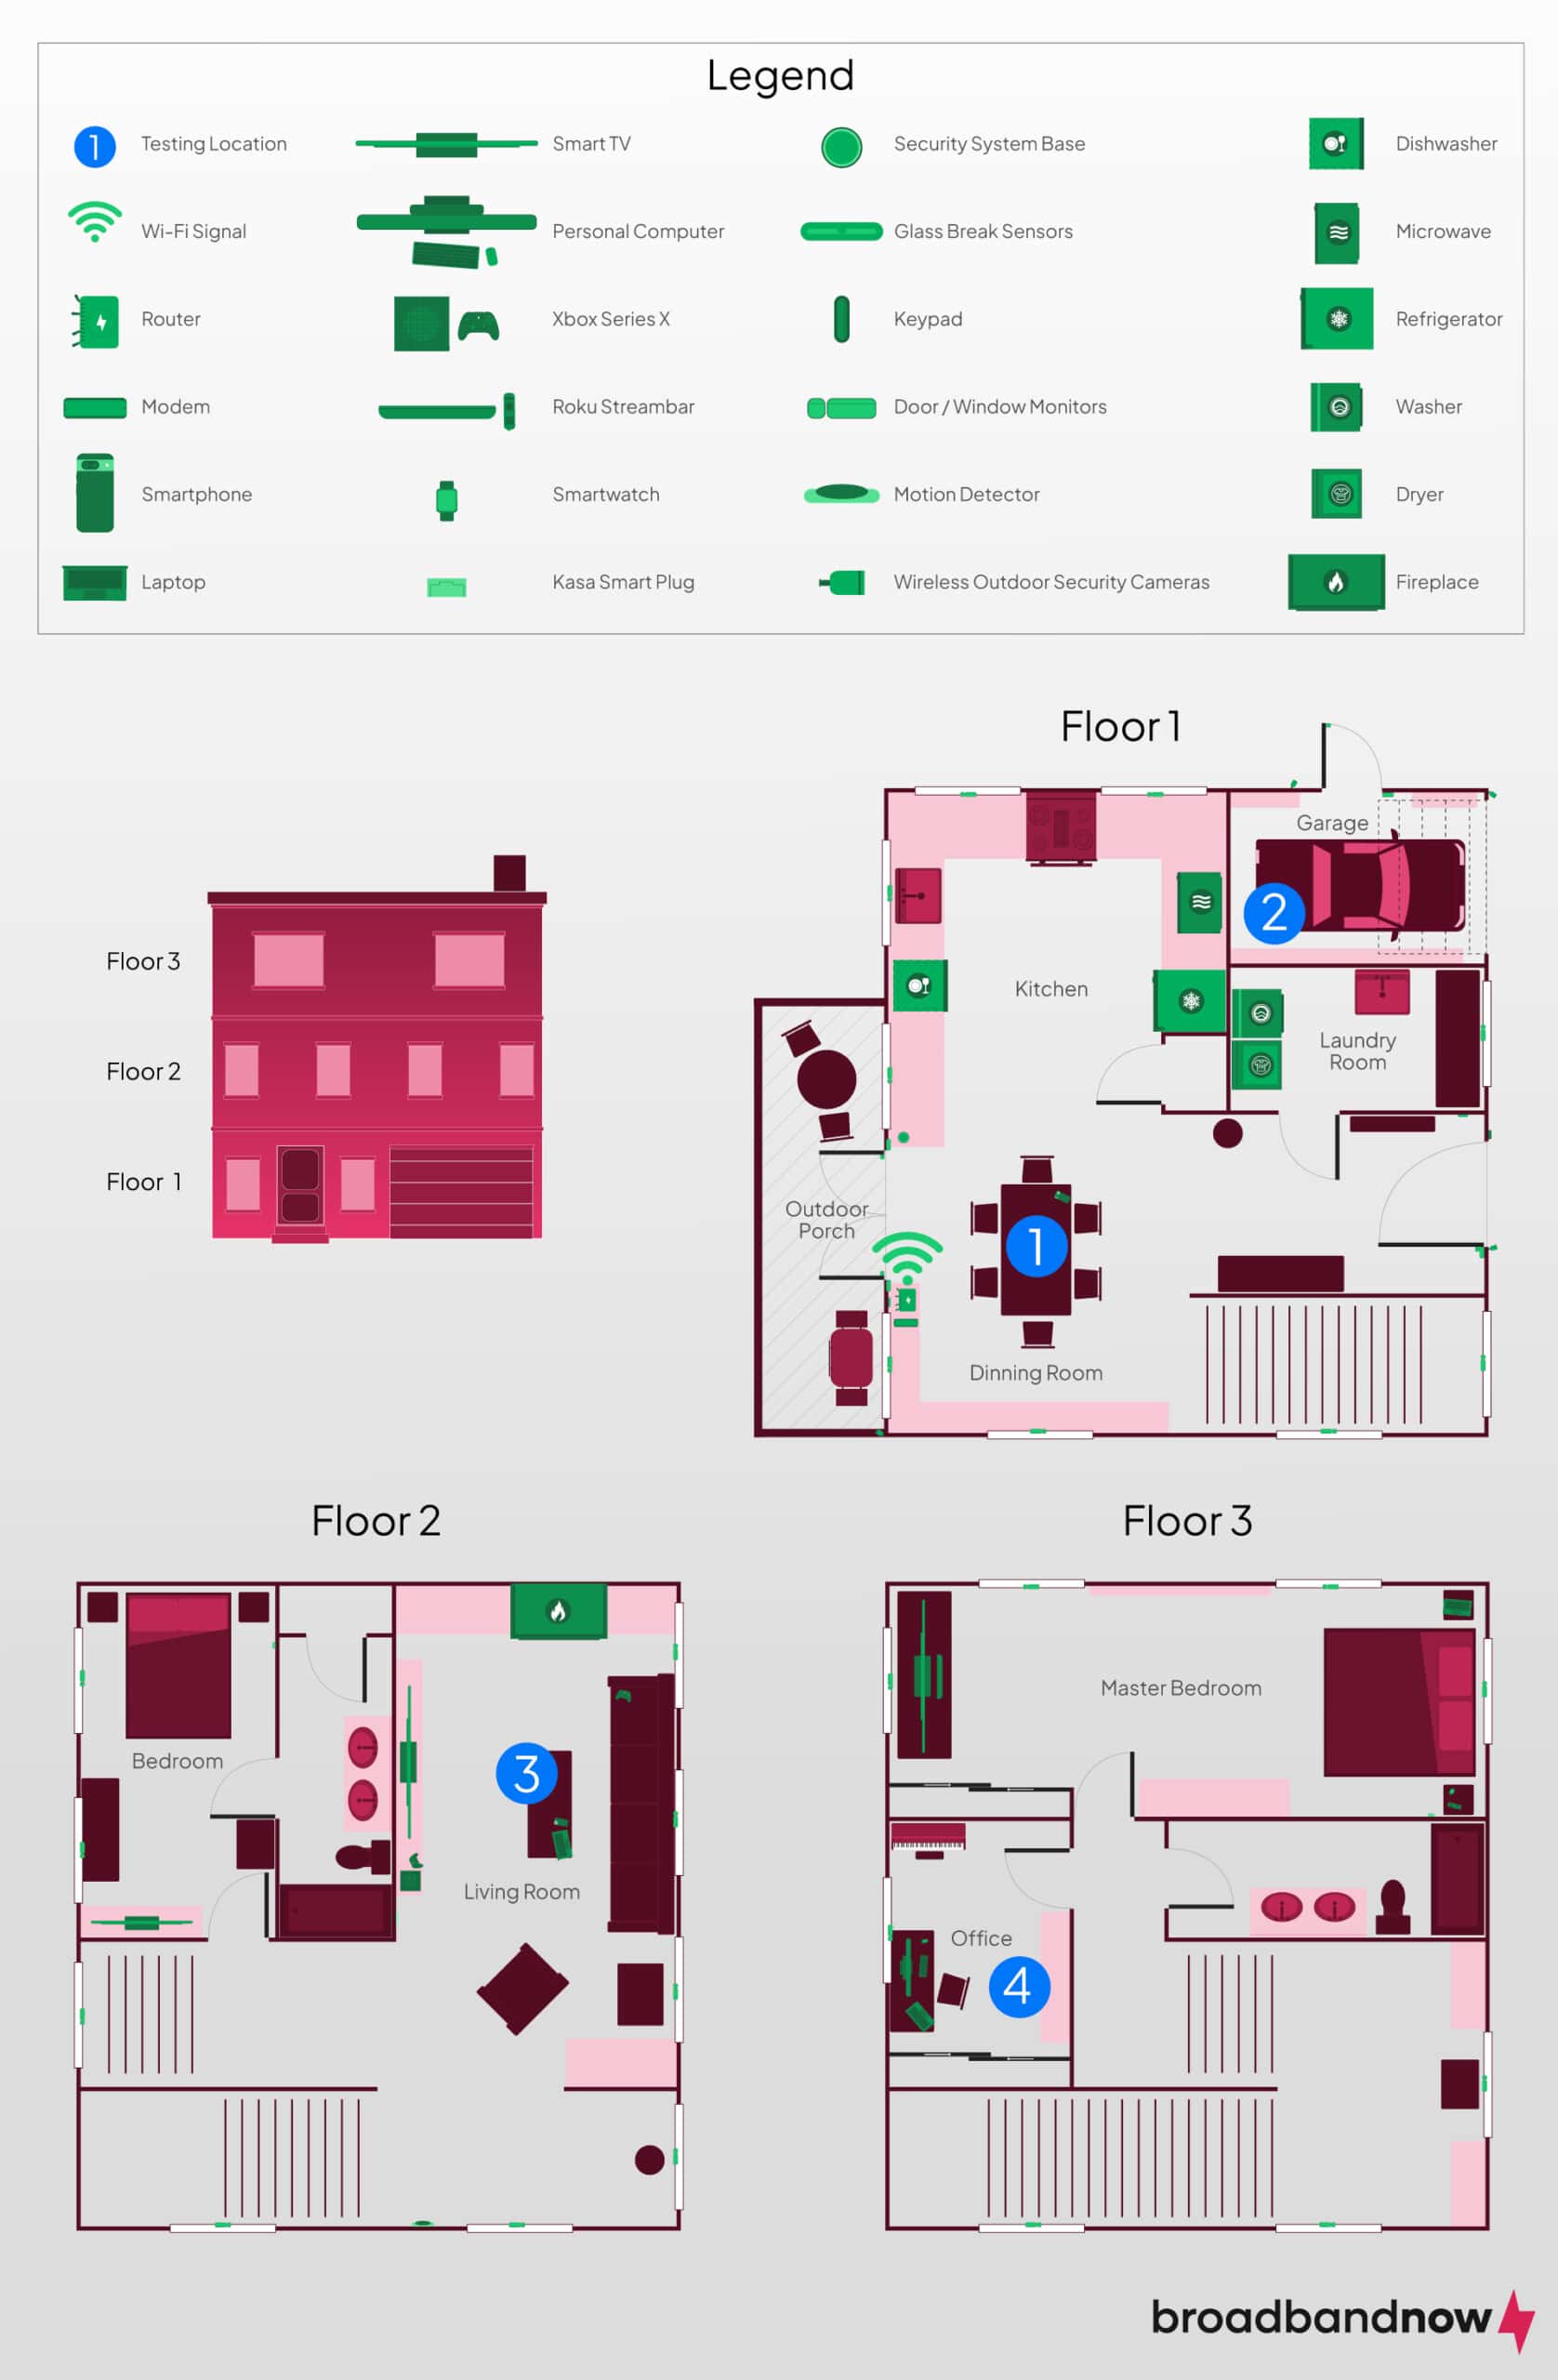 Diagram of the BroadbandNow test home with floor plans and legend